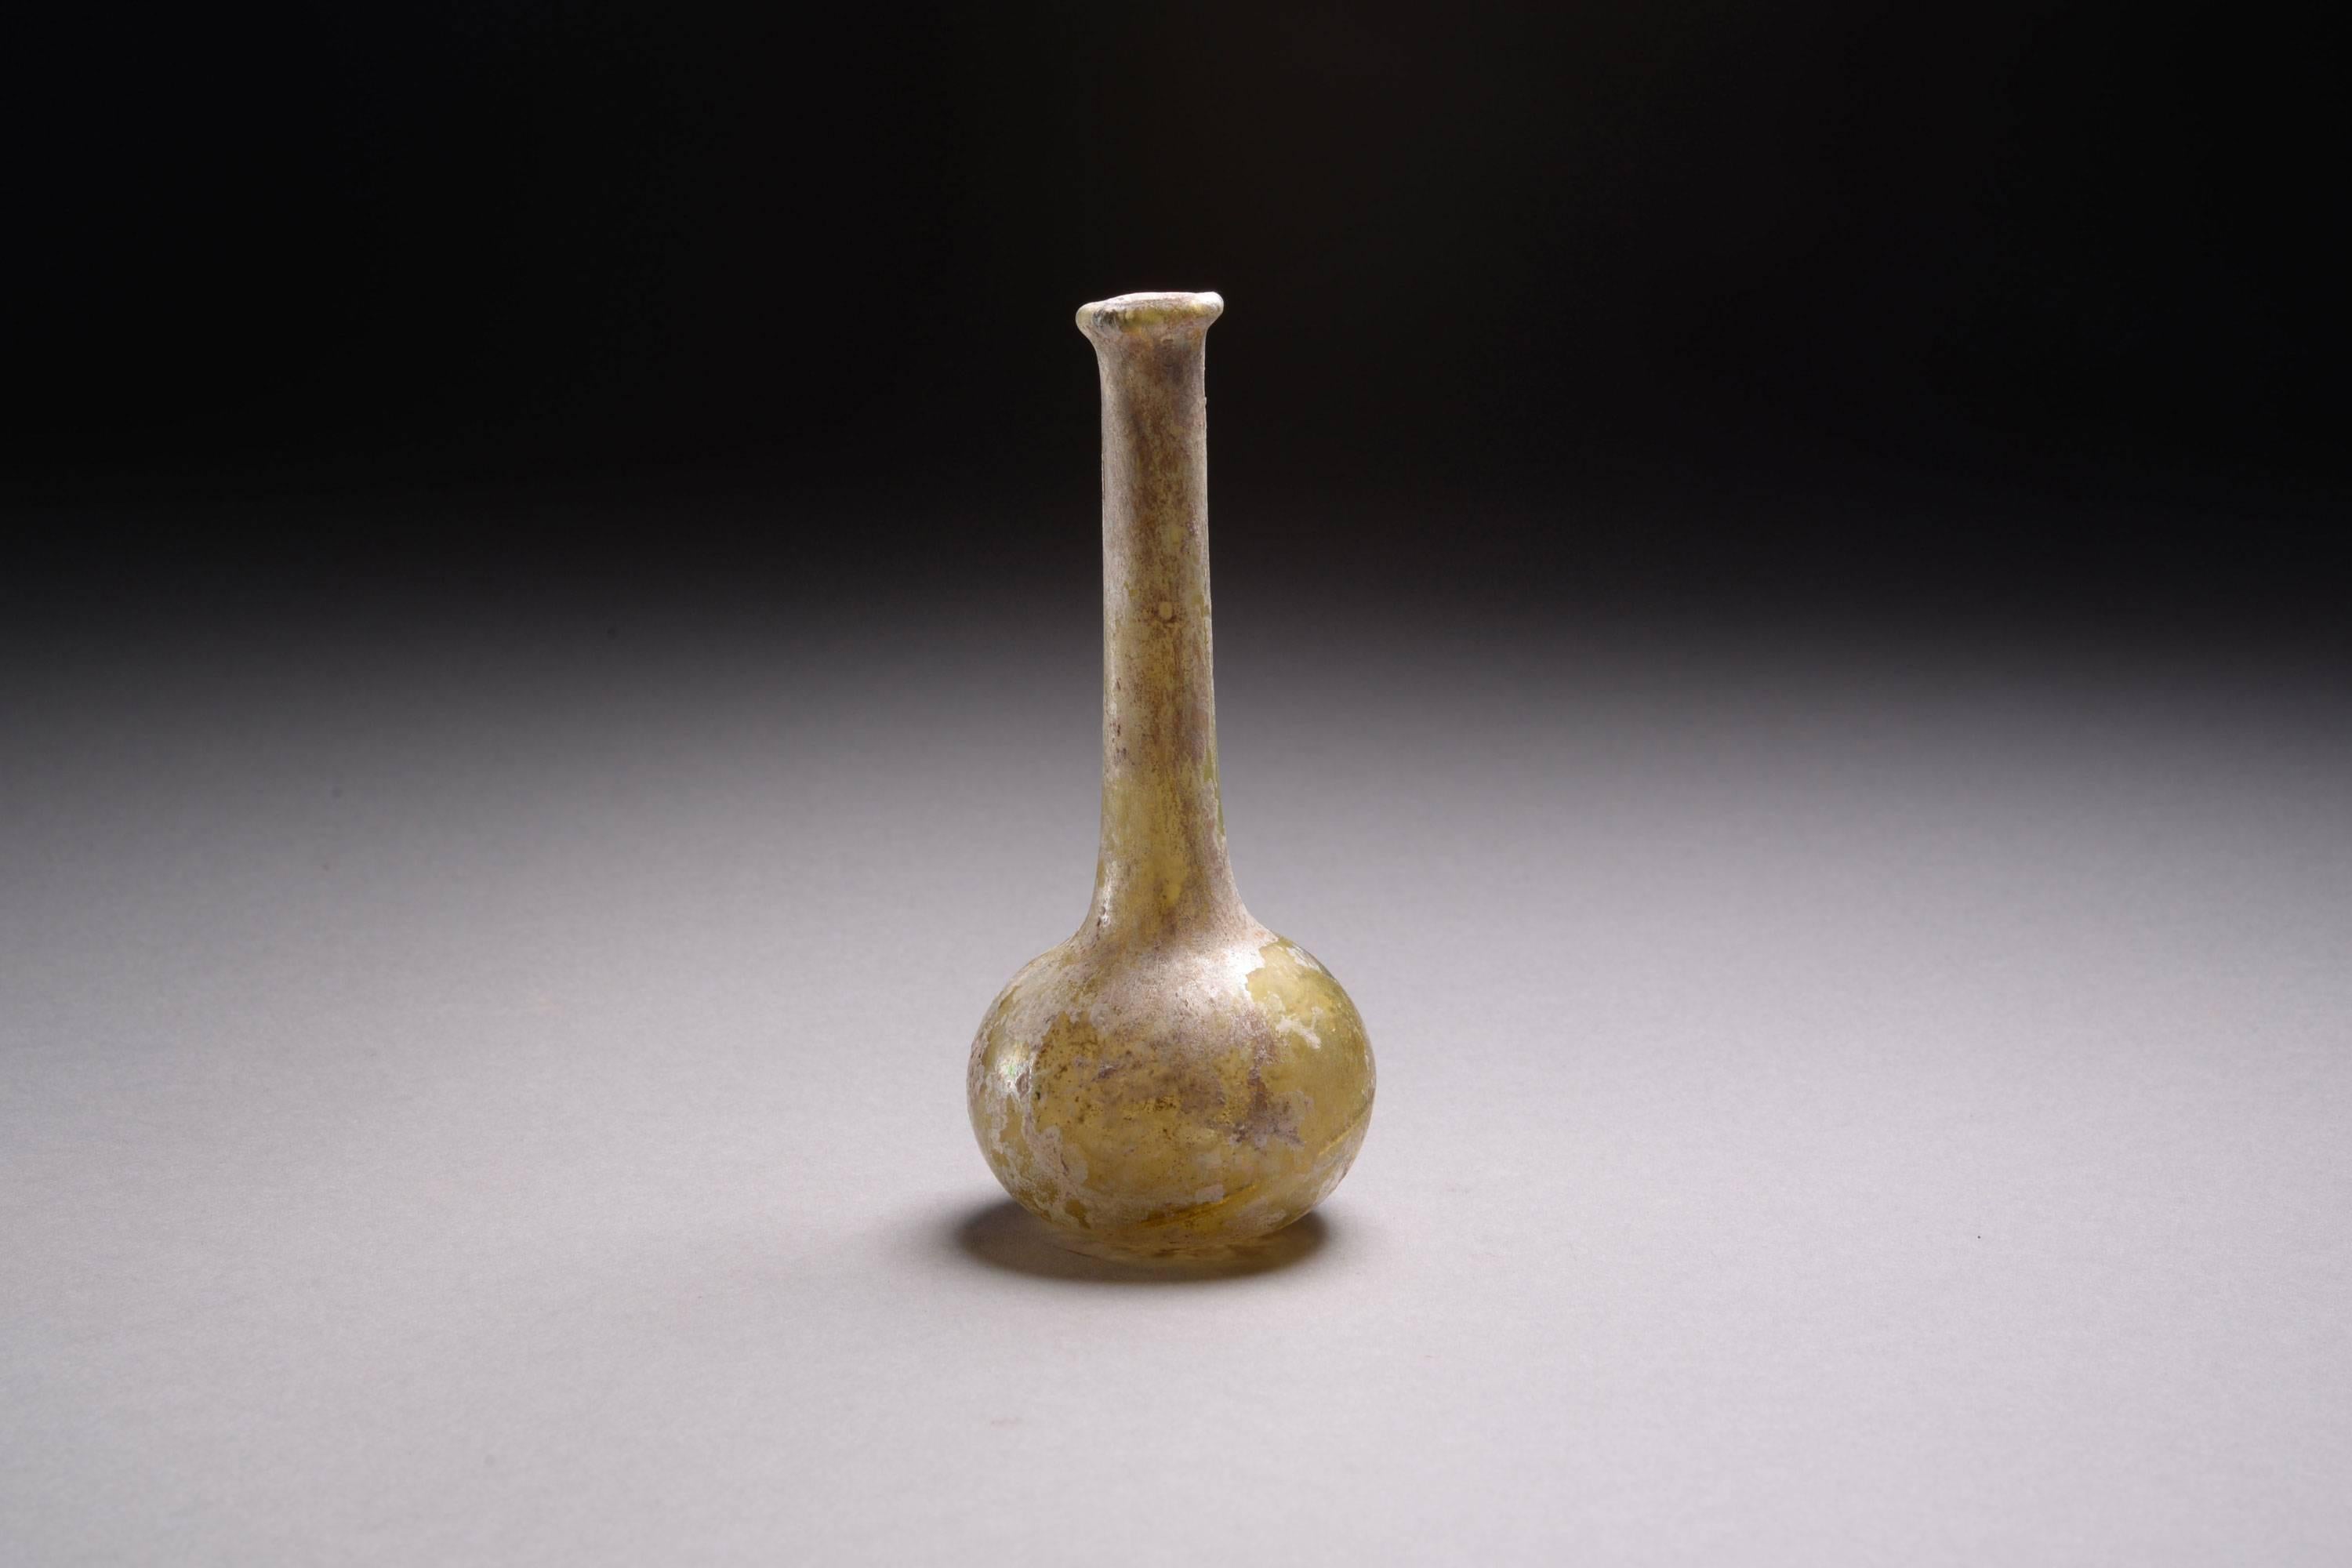 A rare Roman yellow glass unguentarium, dating to the 2nd century AD.

Free blown, the colour a wonderful light yellow, the round body sitting upon a flat base, the long thin neck rising to a rounded lip.

With the long neck cleverly designed so